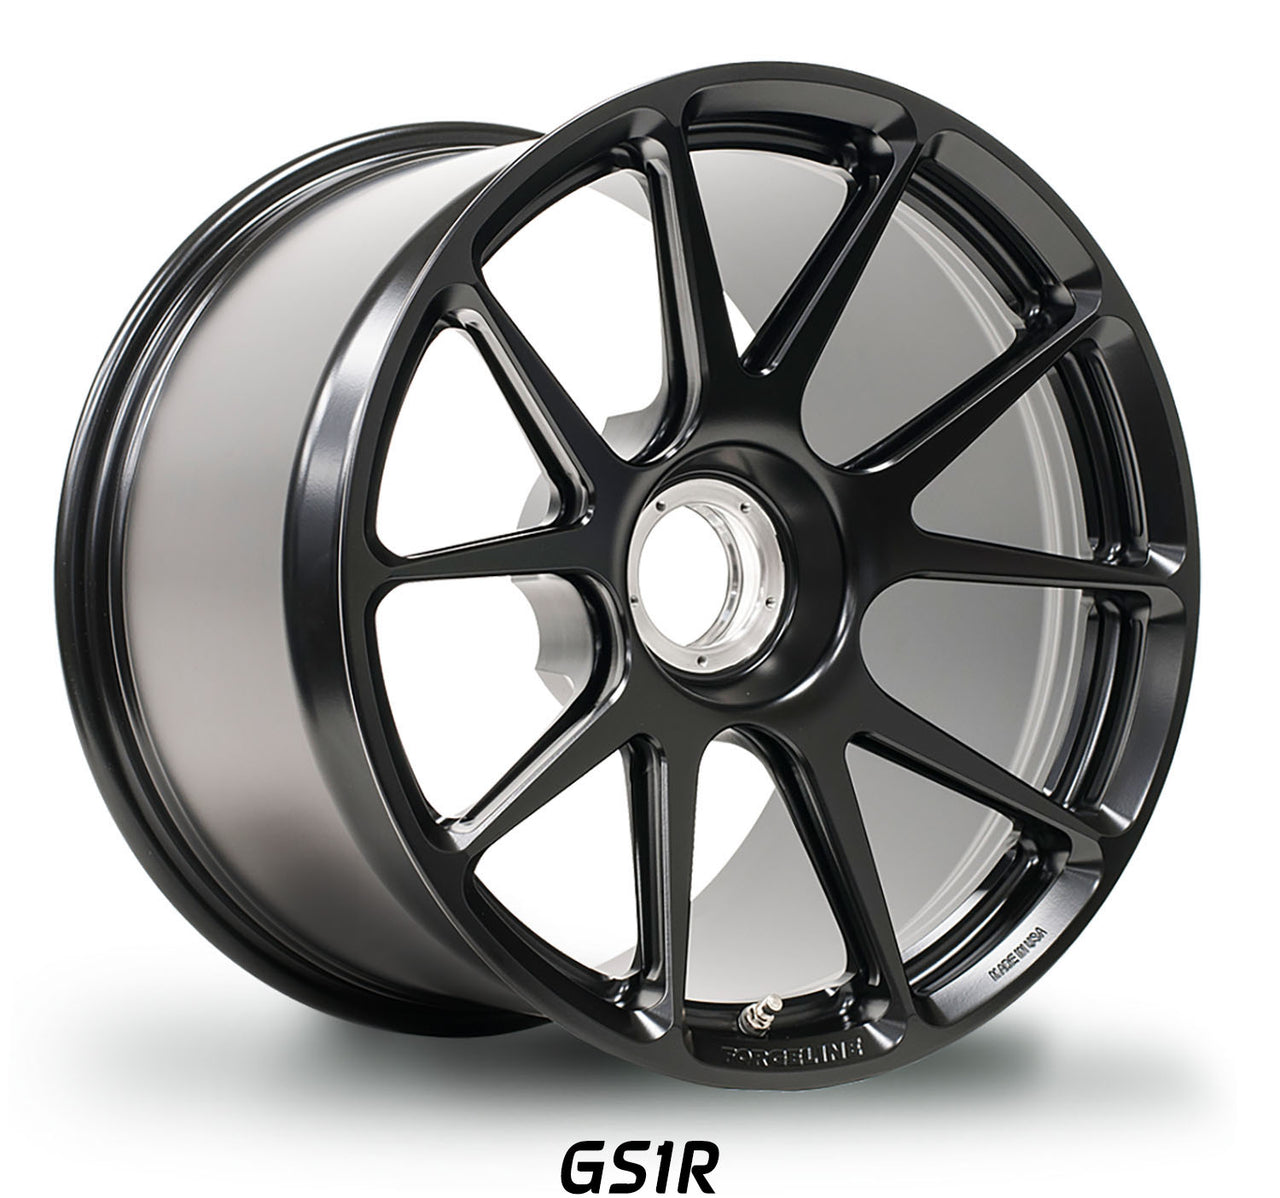 Forgeline GS1R Porsche 991 GT3 RS best forged monoblock wheels for racing and track days